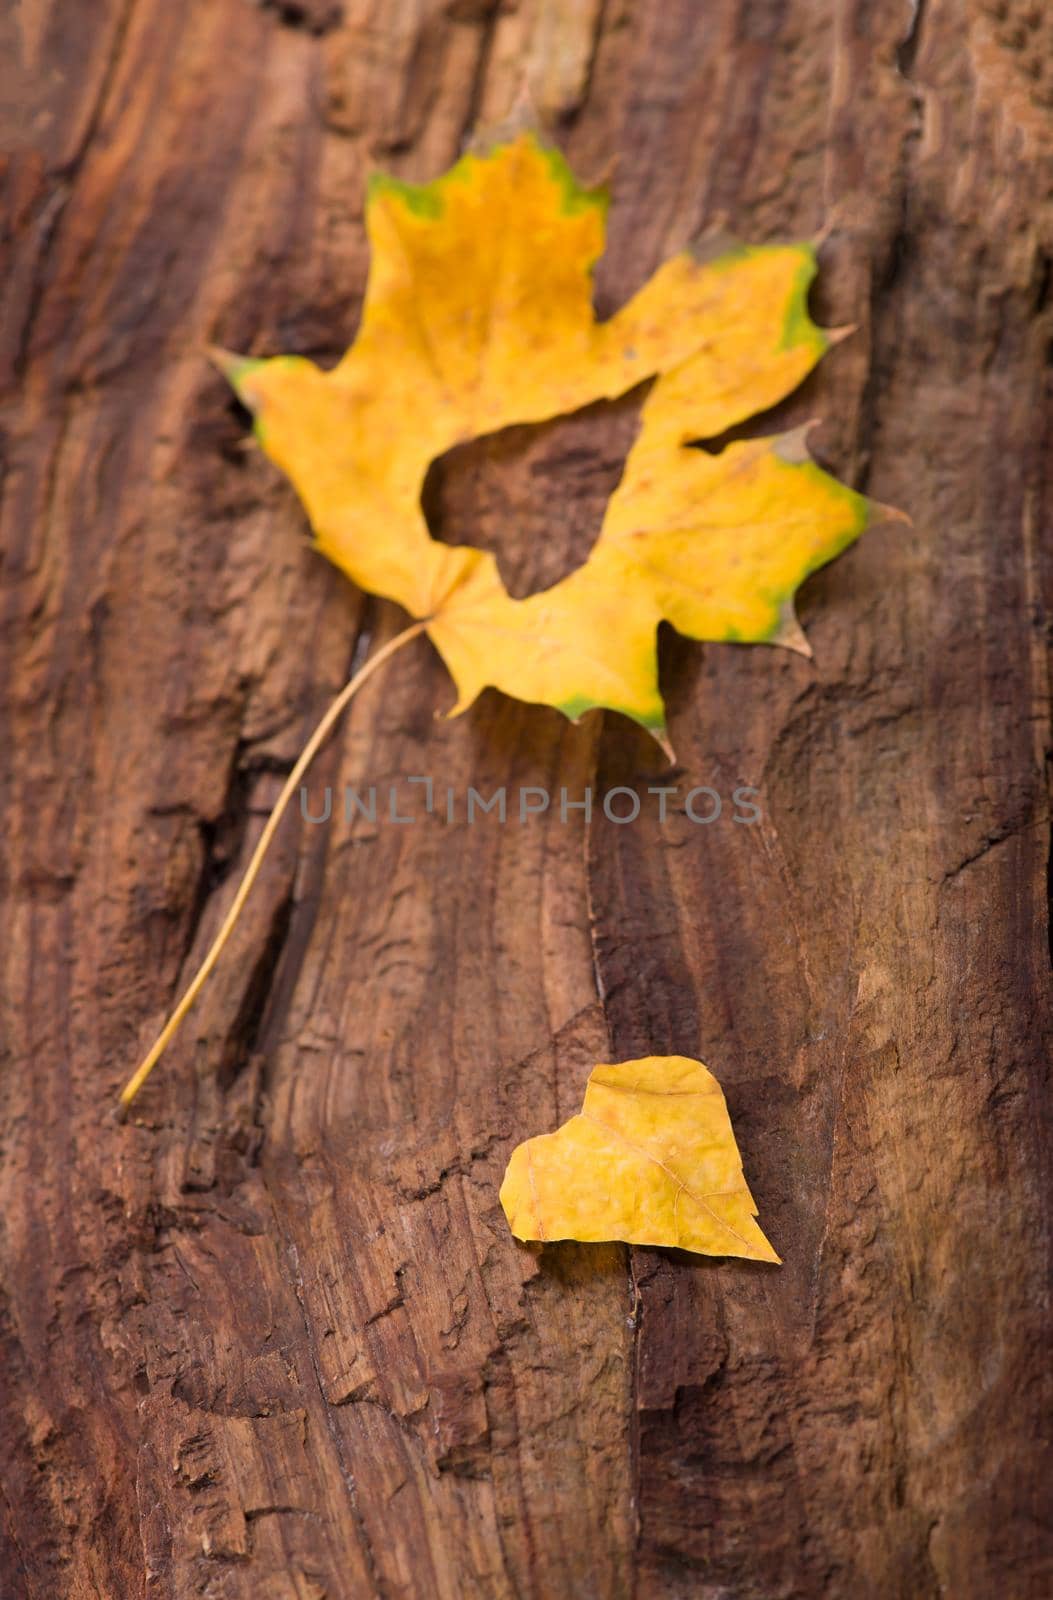 Colorful heart made of autumn leaves on a wooden background by aprilphoto